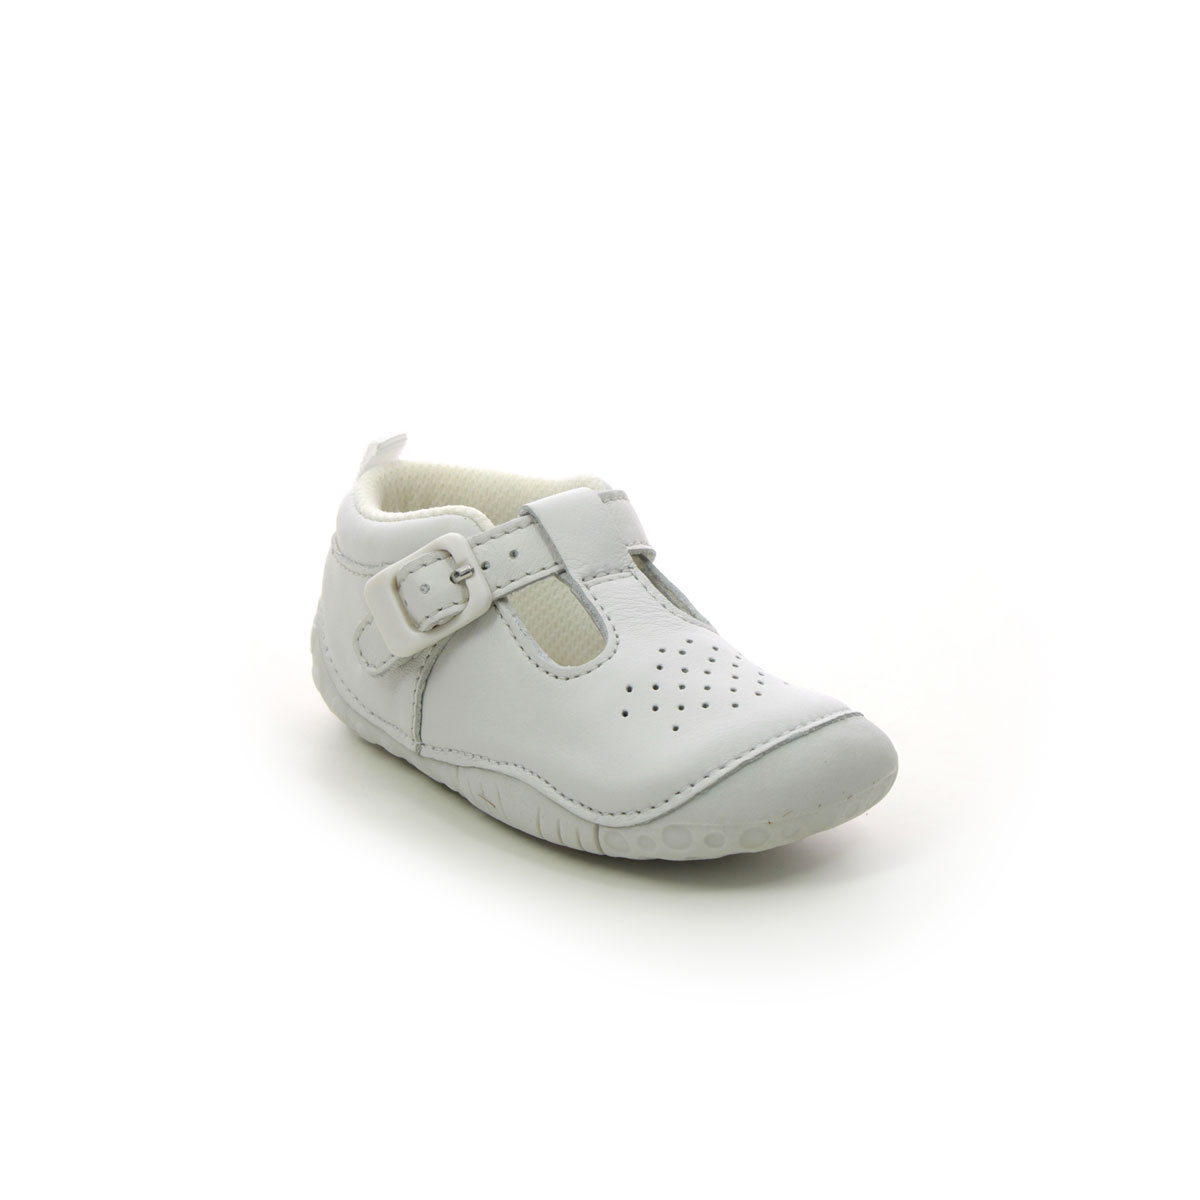 Start Rite - Baby Jack In White Leather 0746-76F In Size 2.5 In Plain White Leather Boys First And Toddler Shoes  In White Leather For kids